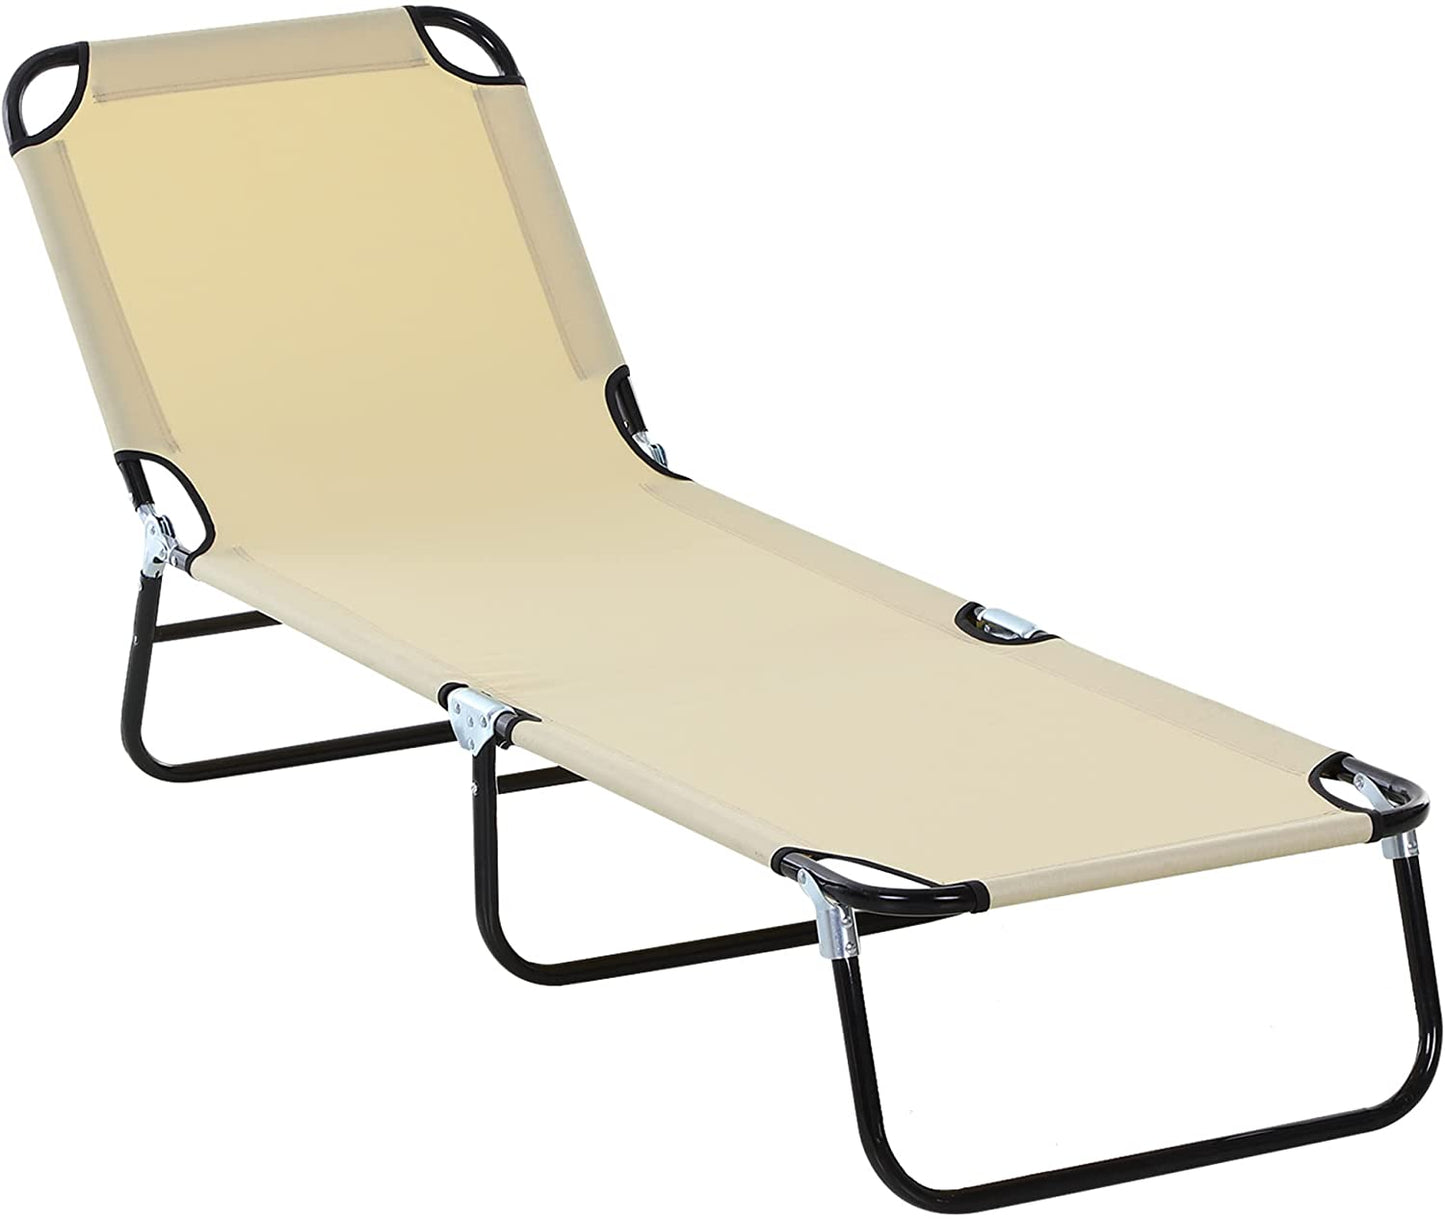 Outsunny Portable Folding Sun Lounger W/ 3-Position Adjustable Backrest Relaxer Recliner